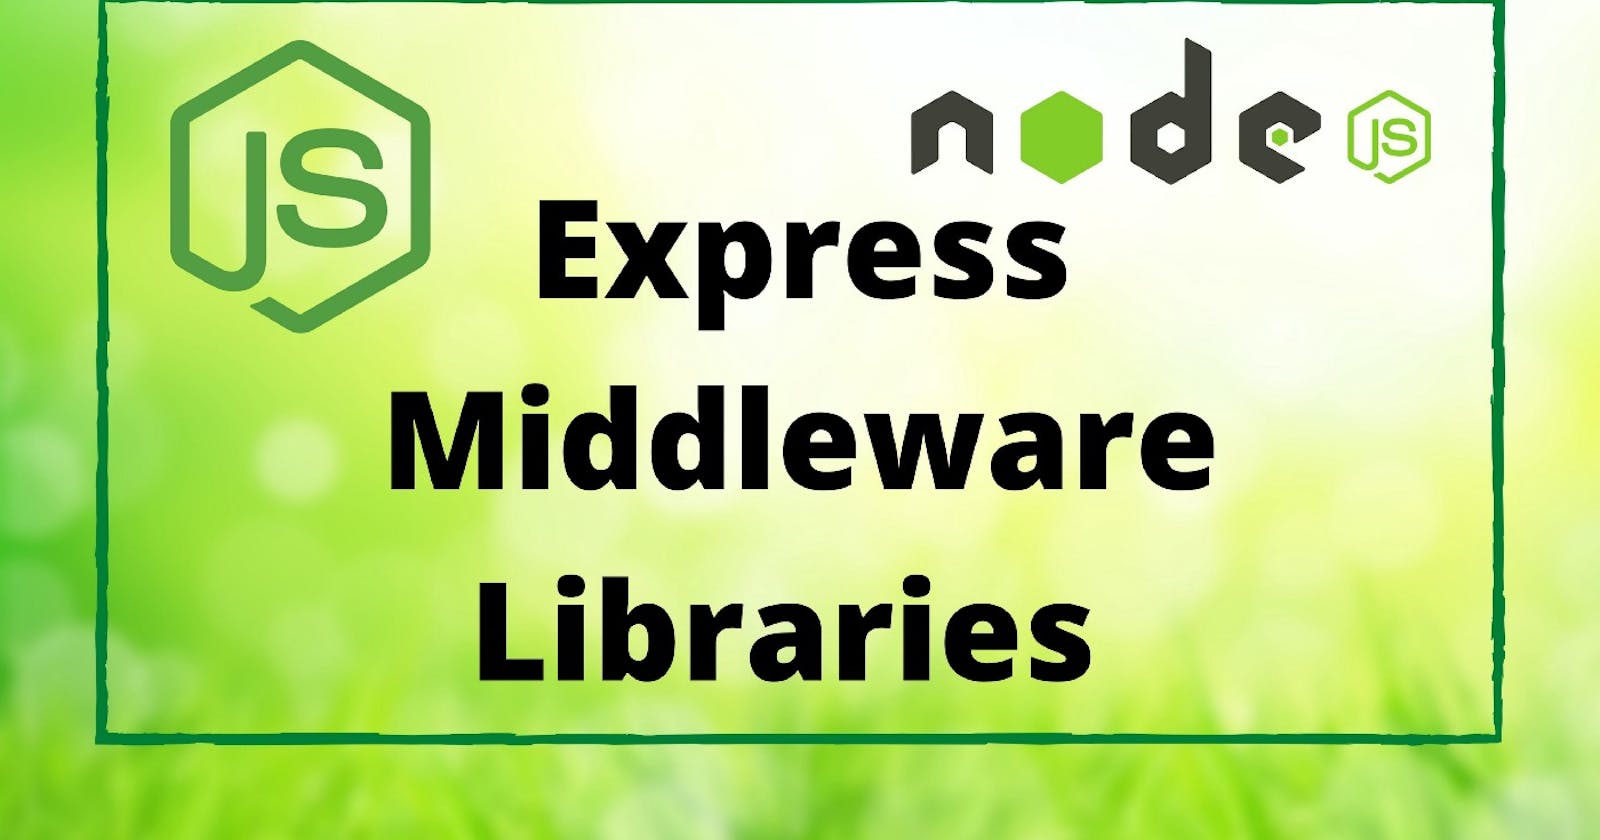 5 Express Middleware Libraries Every Developer Should Know